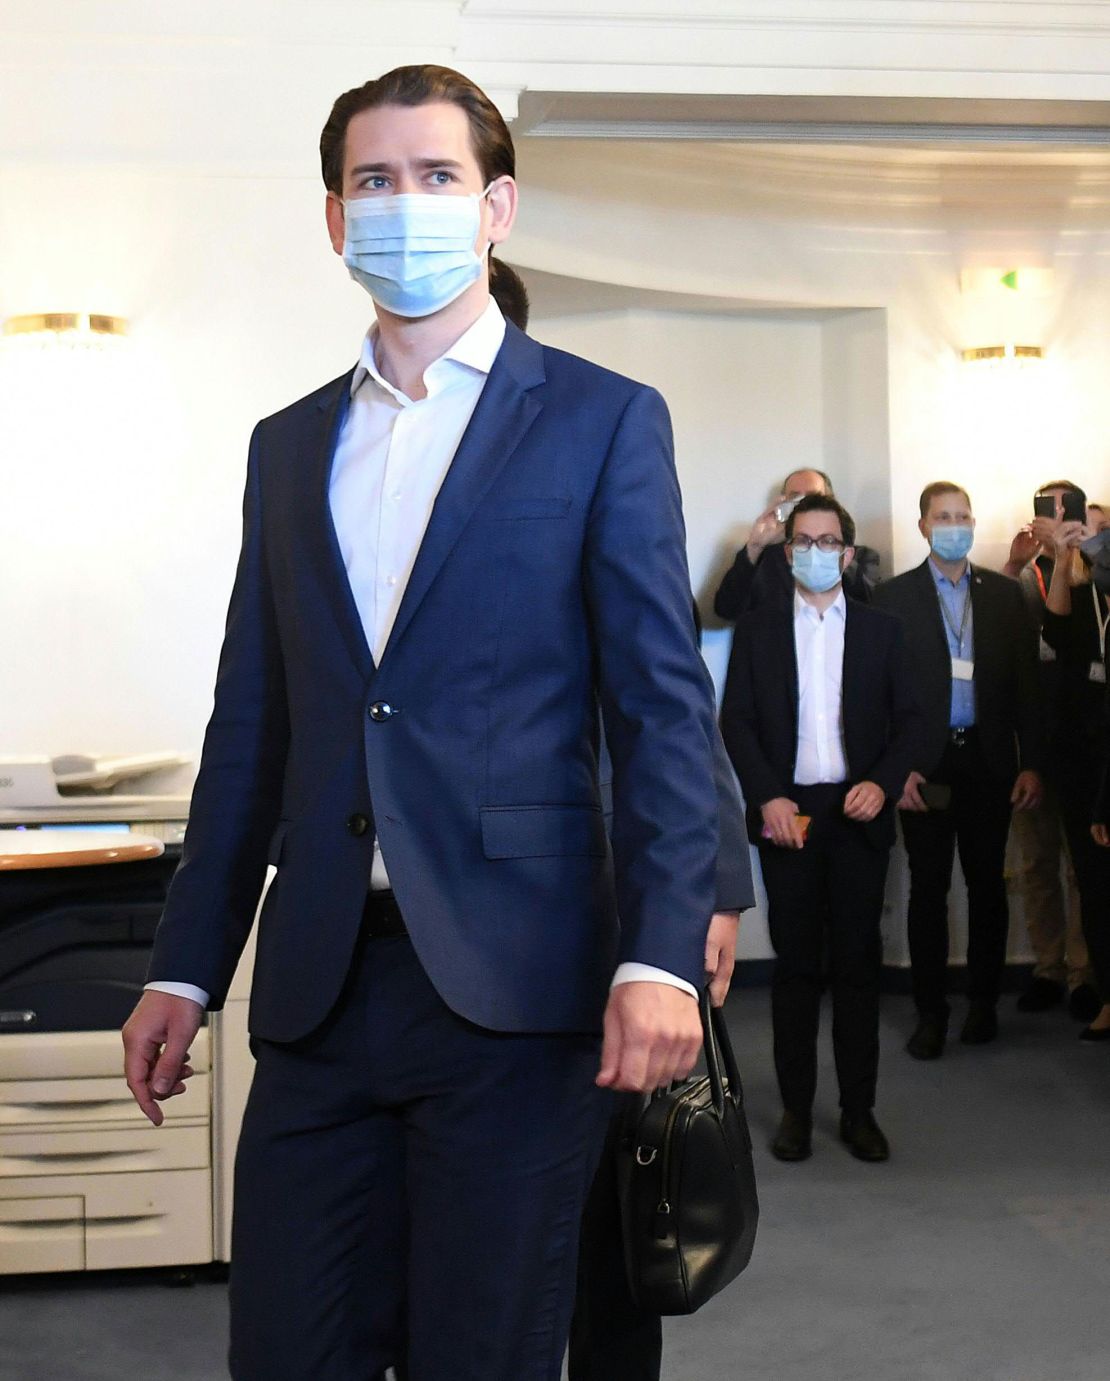 And so did rightwing Austrian Chancellor Sebastian Kurz, at a hearing on the country's so-called Ibiza scandal on June 24 in Vienna.
